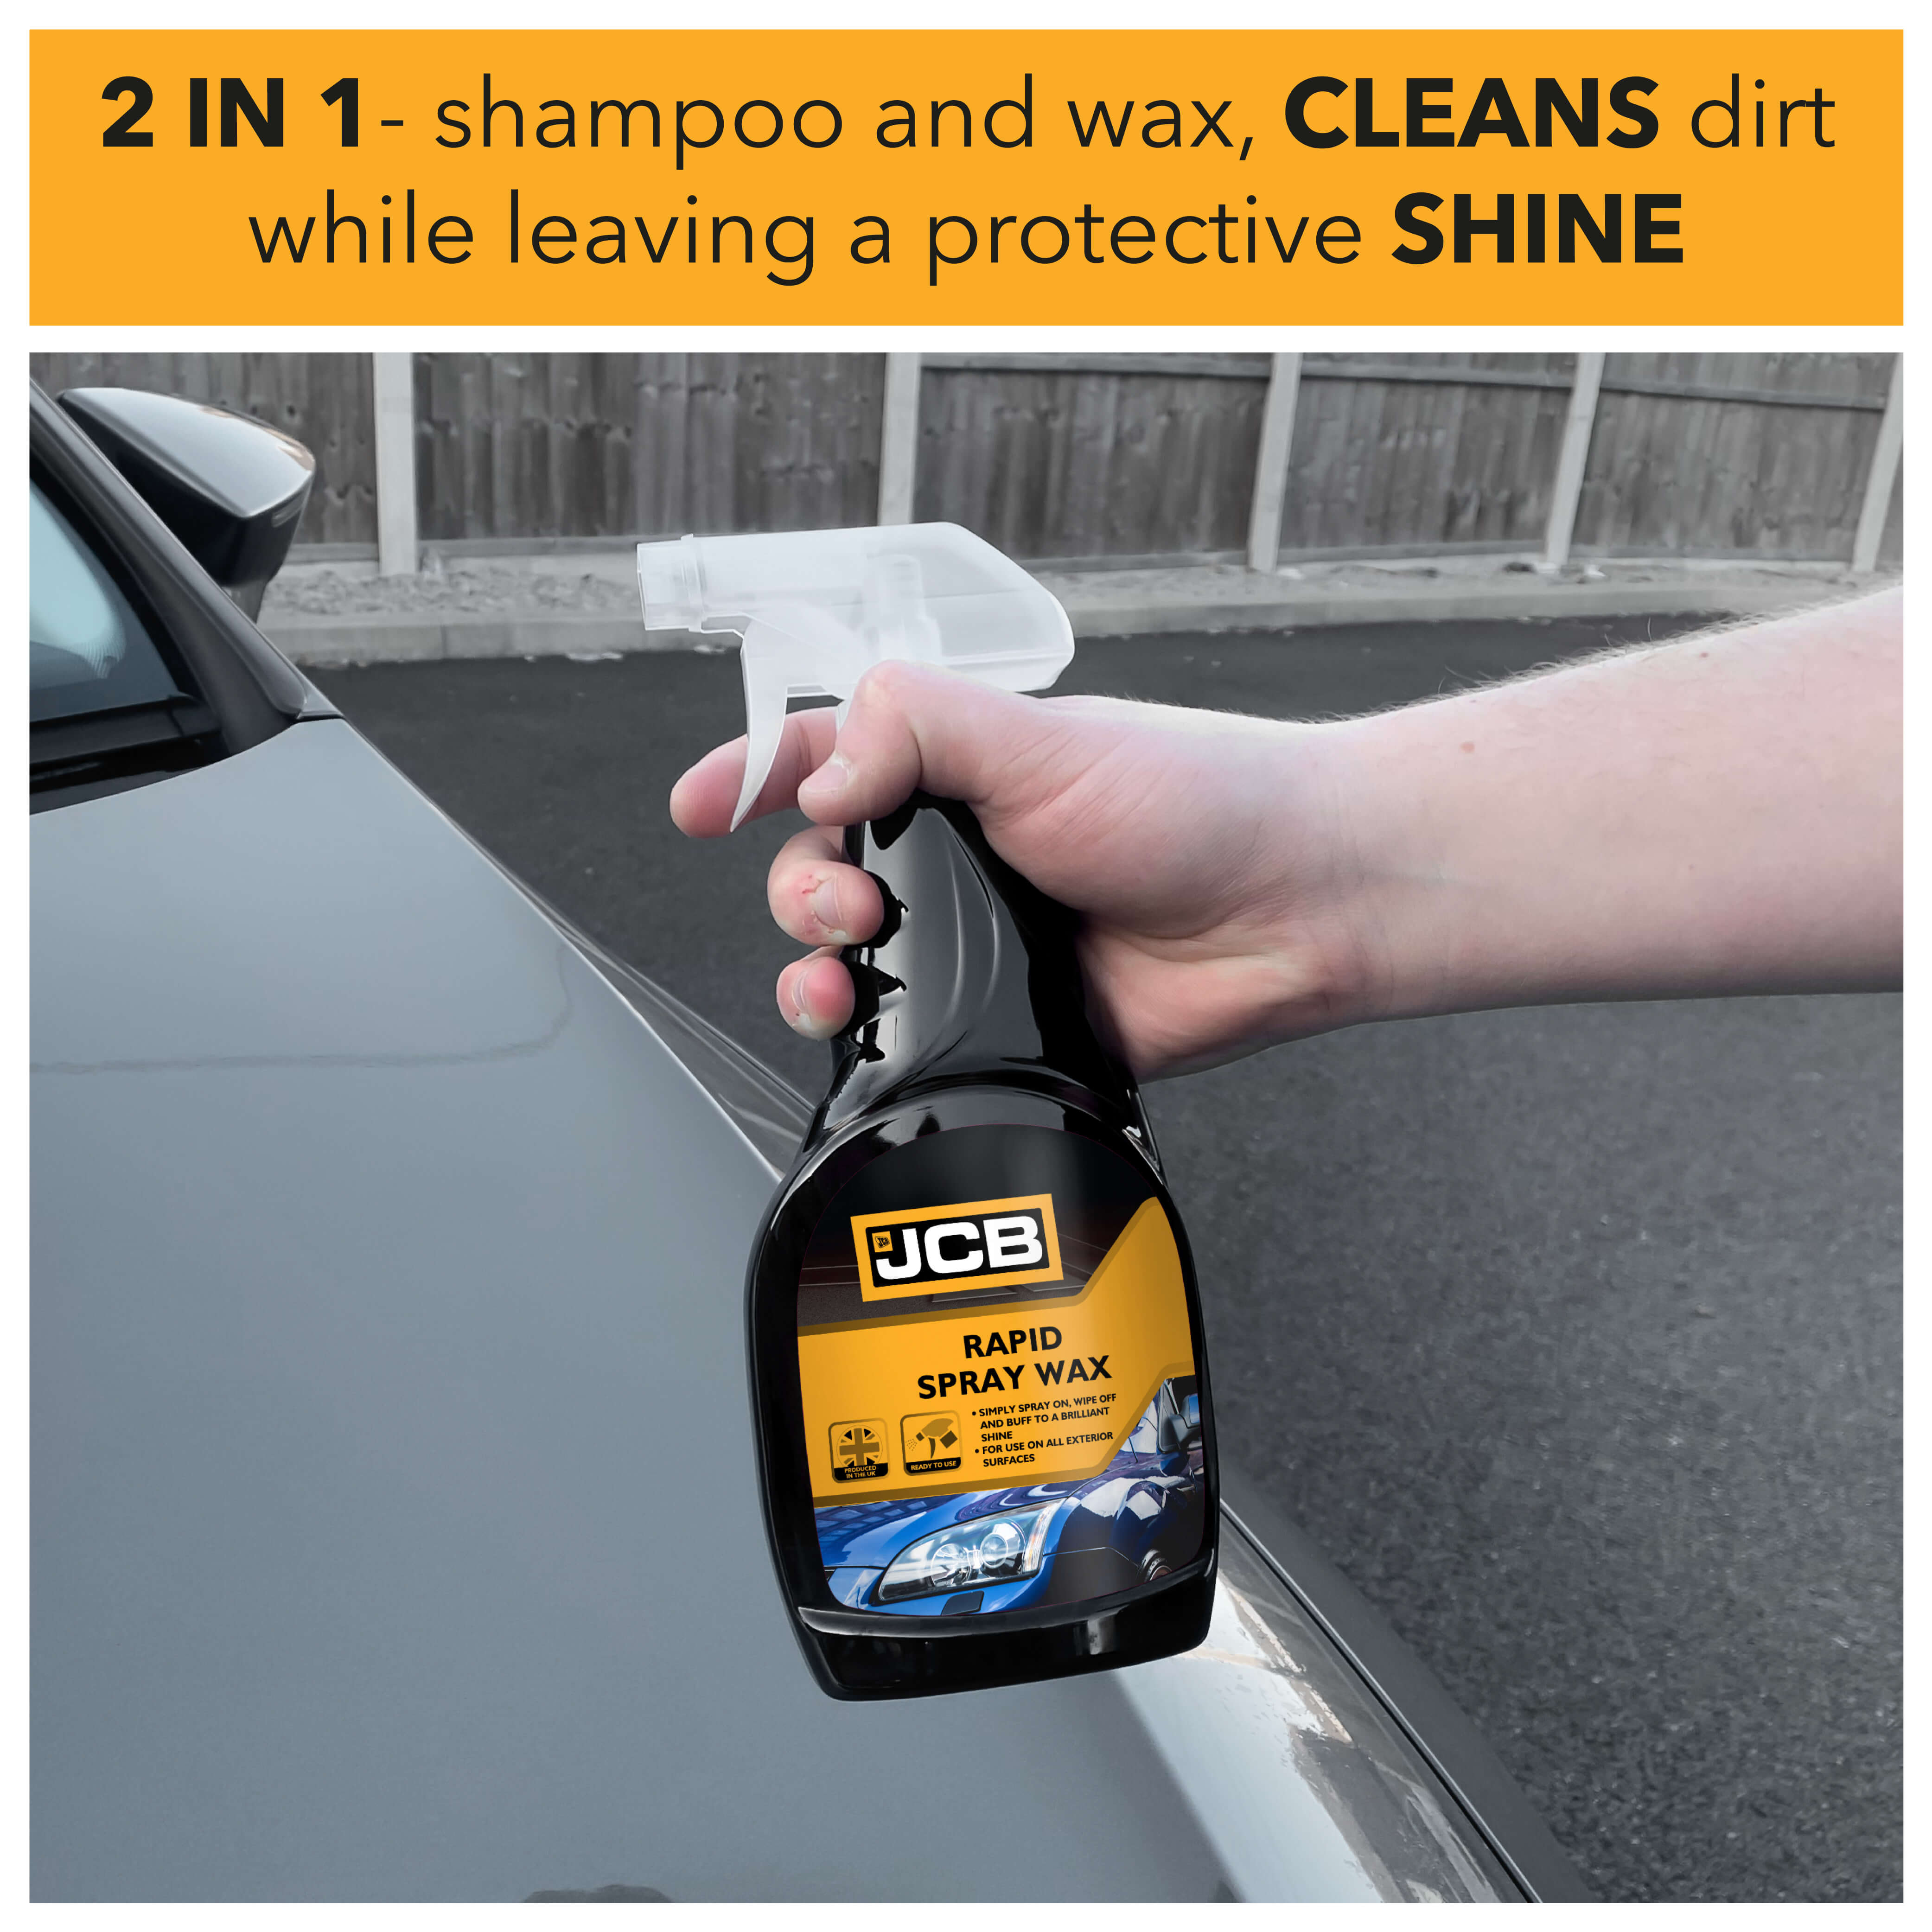 2 in 1 - shampoo and wax, cleans dirt while leaving a protective shine